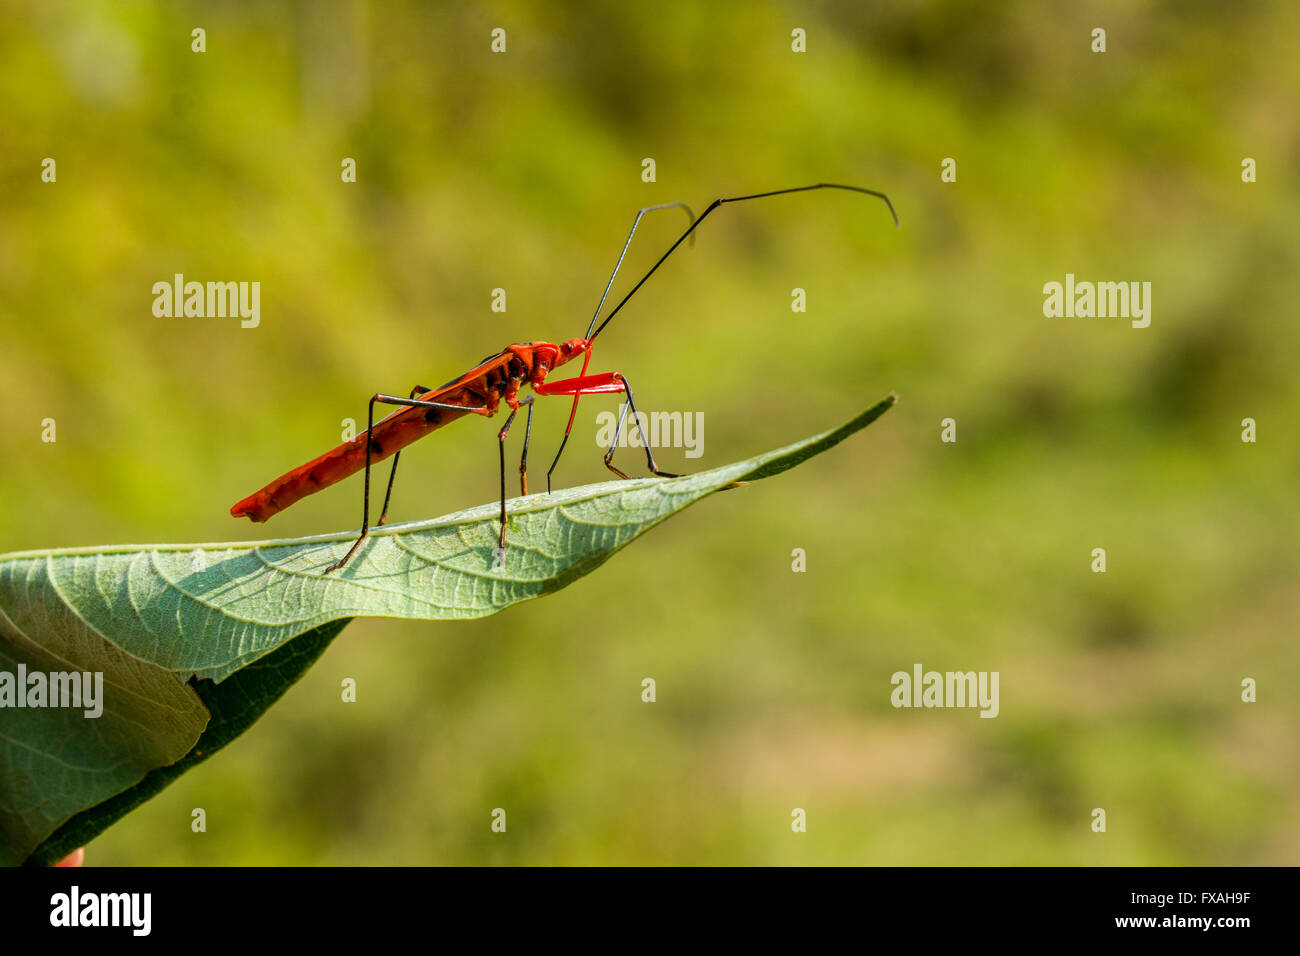 Red Cotton Bug (Dysdercus cingulatus) perched on the leave of a tree, Sauraha, Chitwan, Nepal Stock Photo